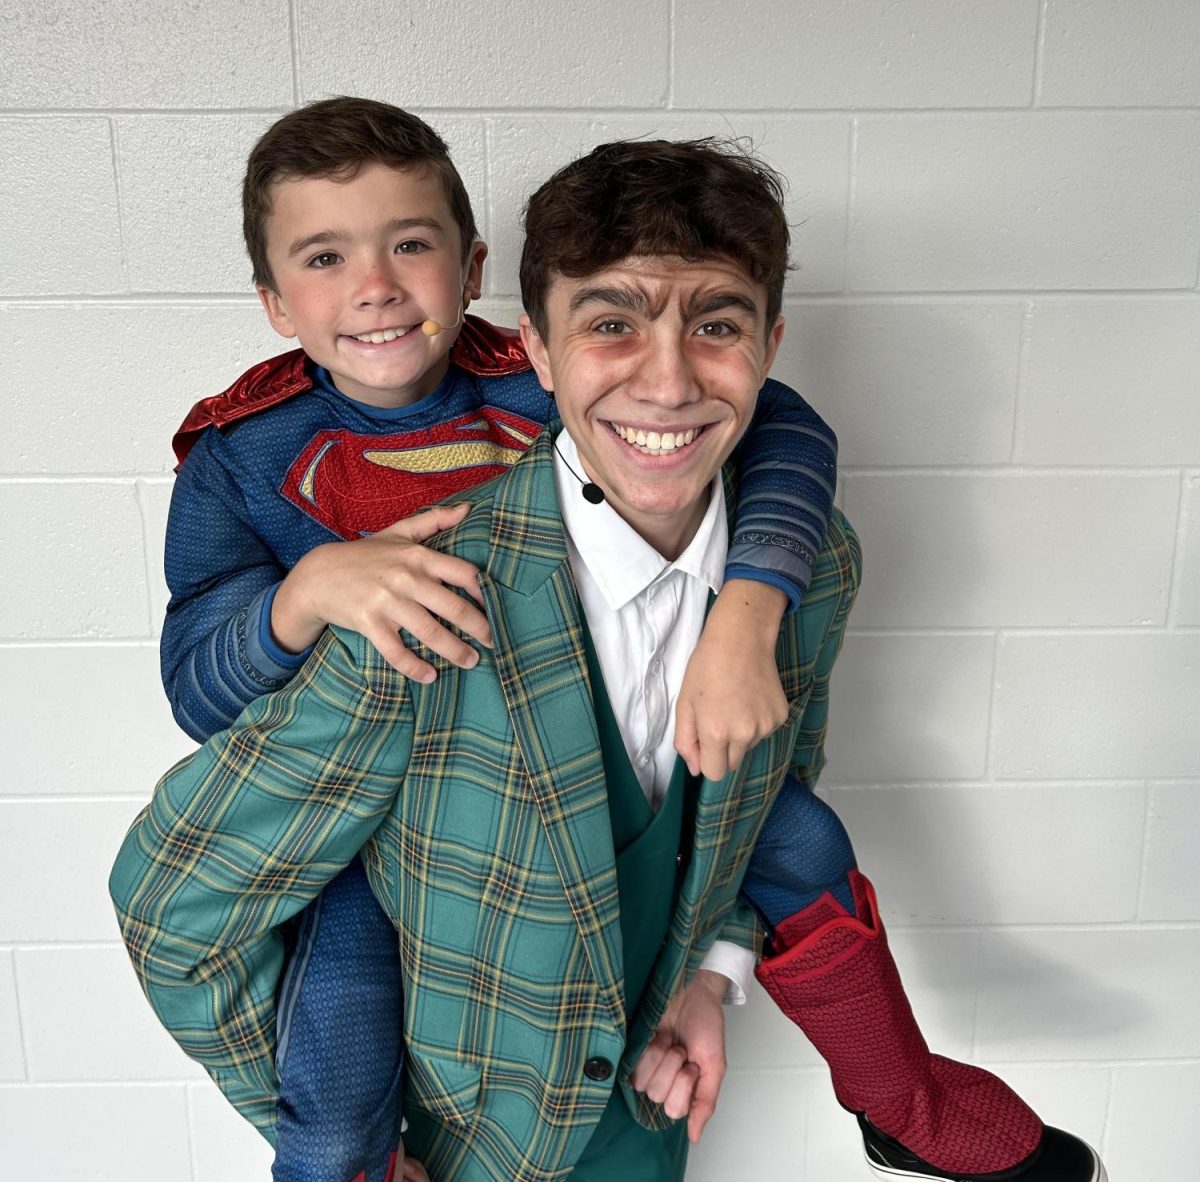 Giving+his+brother%2C+fourth+grader%2C+Landen+Knott%2C+a+piggy+back+ride%2C+junior+Colton+Knott+poses+for+a+photo+before+their+dress+rehearsal+performance+of+Matilda+the+Musical+Thursday+morning+for+Gretna+Public+Schools+elementary+school+students.+Colton+Knott+played+the+lead+male+role%2C+Mr.+Woormwood%2C+while+his+brother+shared+the+stage+with+him+playing+Nigel%2C+who+is+a+kid+in+Matildas+class.+